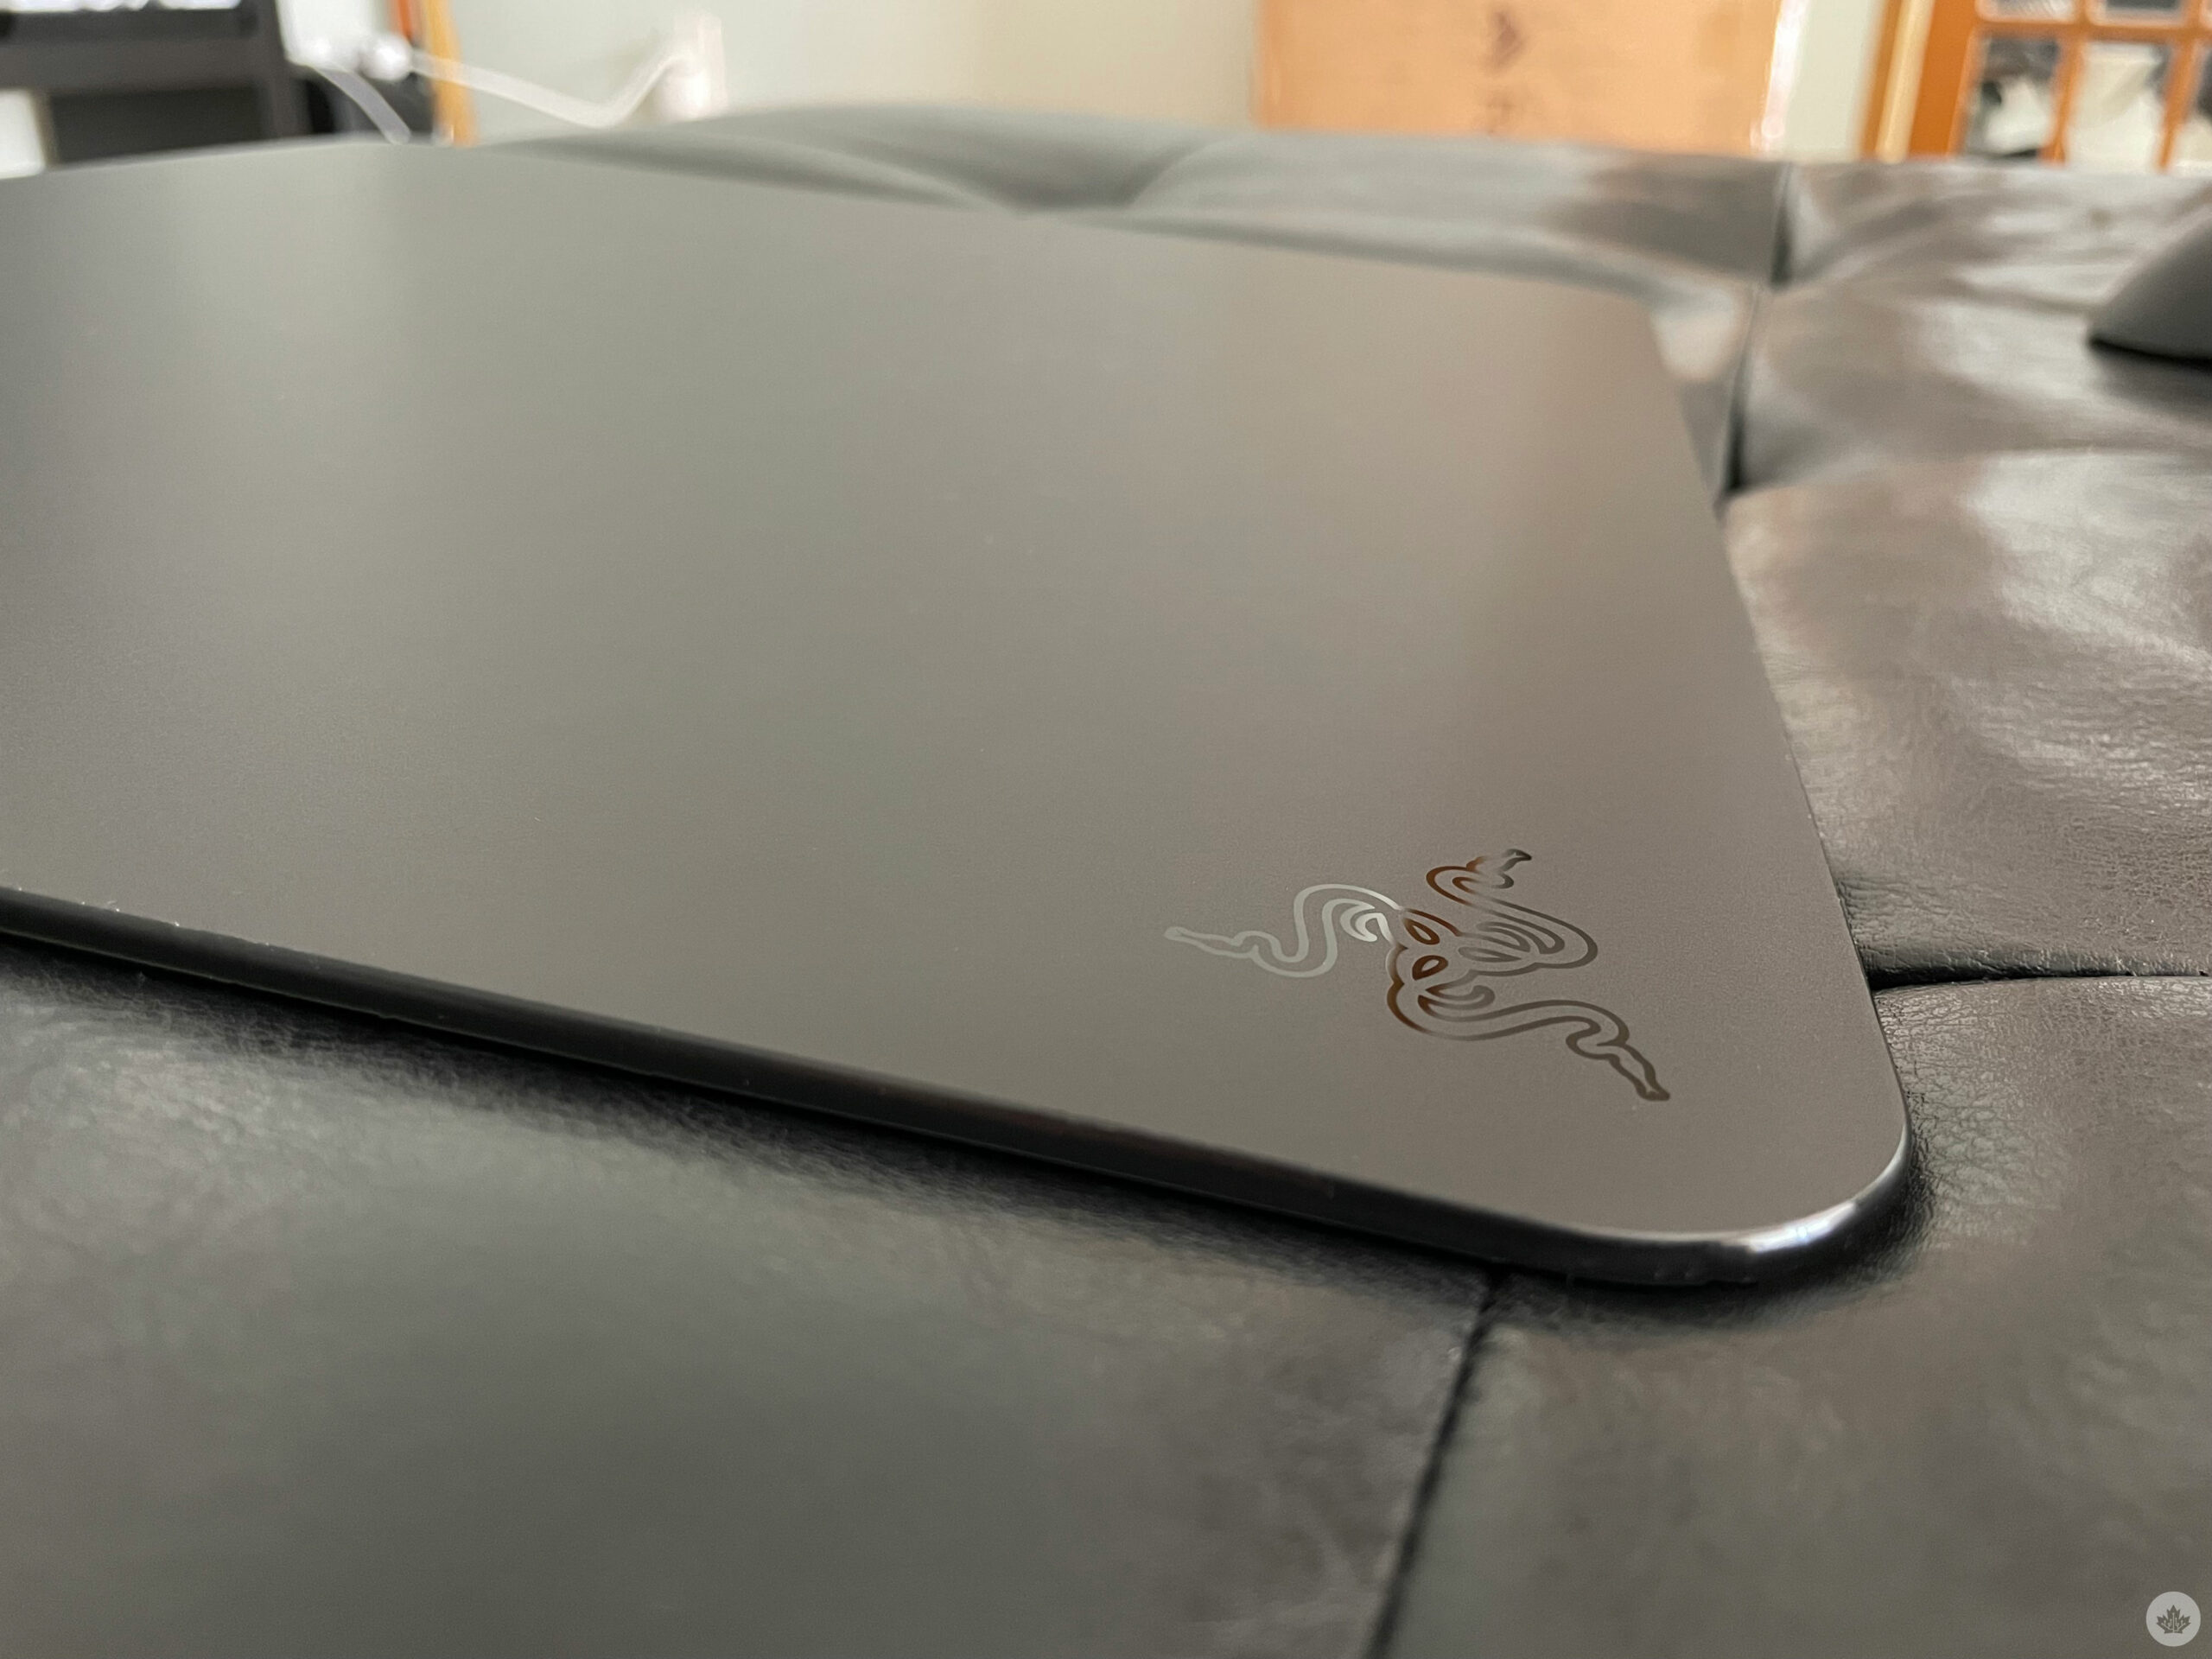 Razer Atlas: The tempered glass mousepad I didn't know I needed